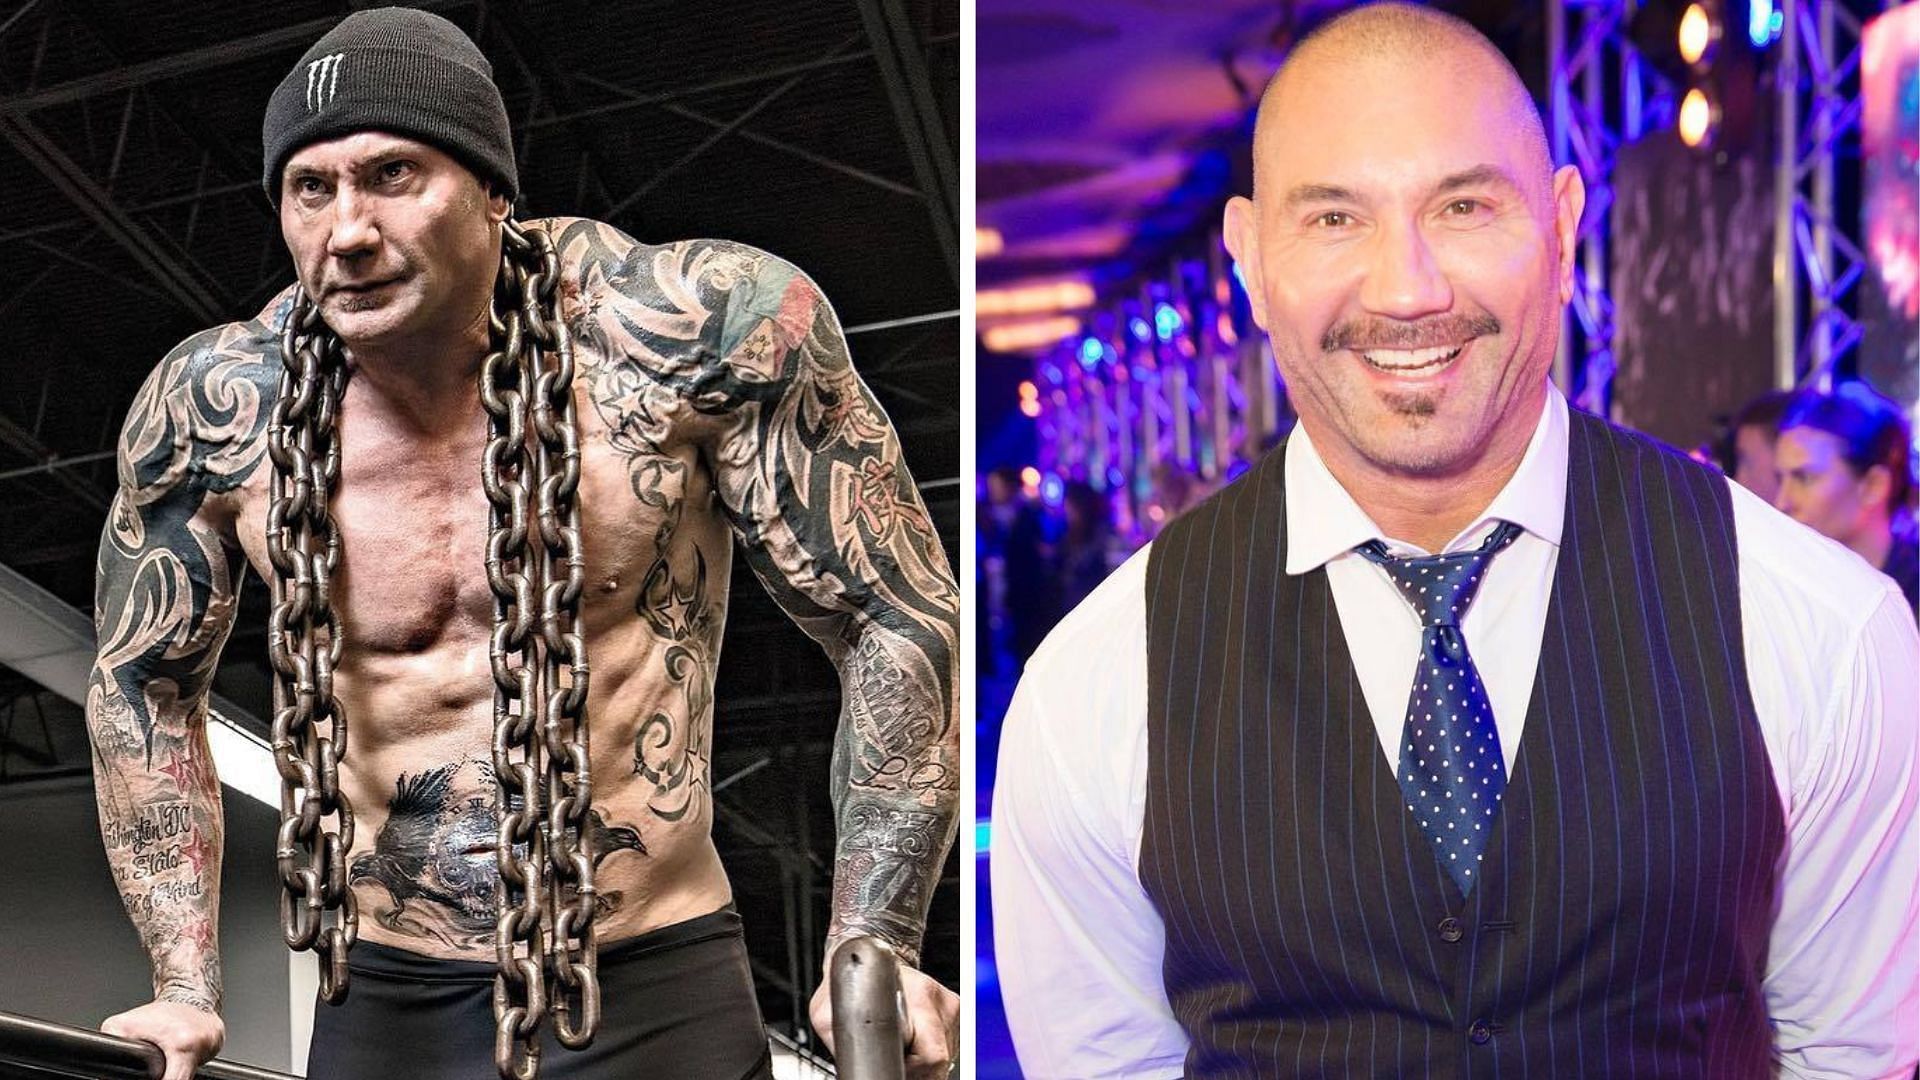 Former WWE Superstar Batista is currently doing well in Hollywood